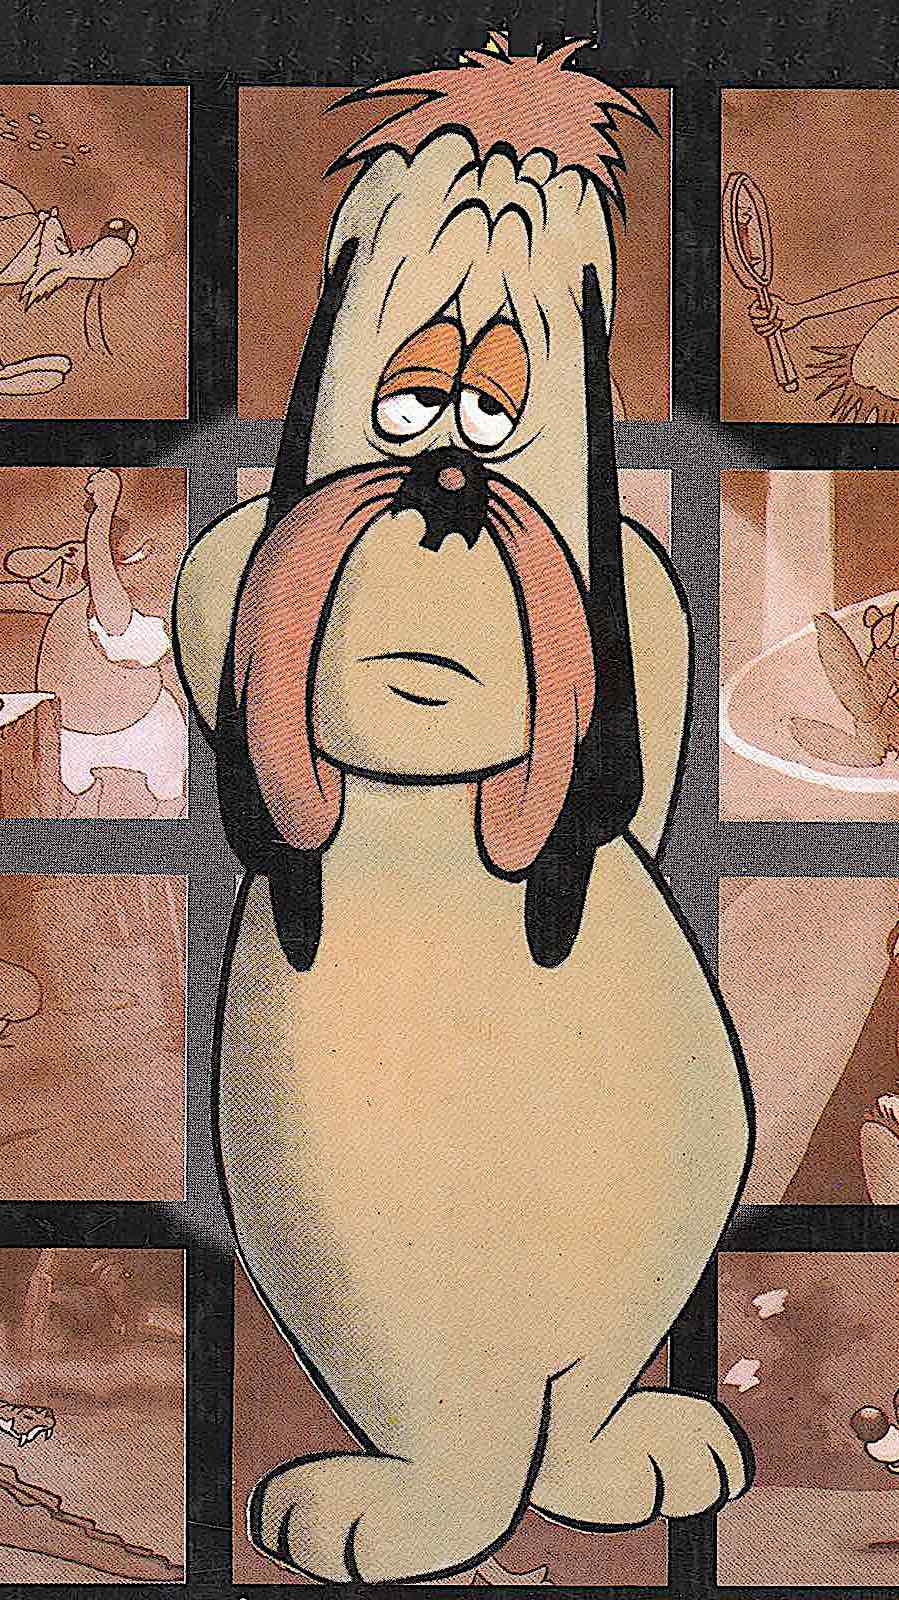 Tex Avery's classic animation character Droopy